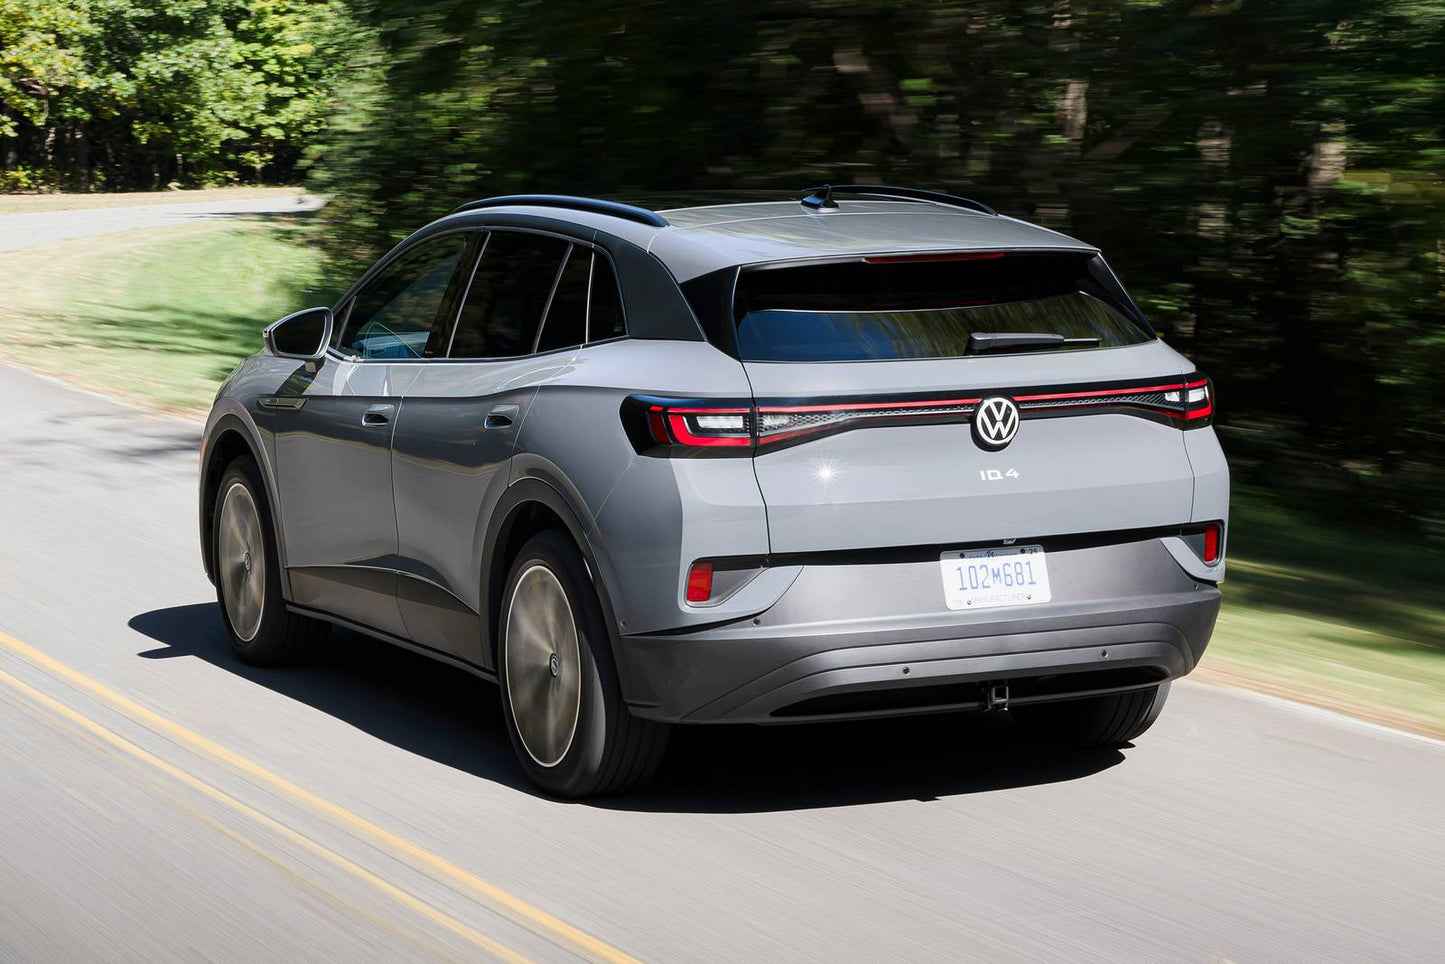 2023 Volkswagen ID.4 Pro S Plus 4dr SUV w/LG Energy Solution Battery, 135kW DC Fast Charging Capability (electric DD)